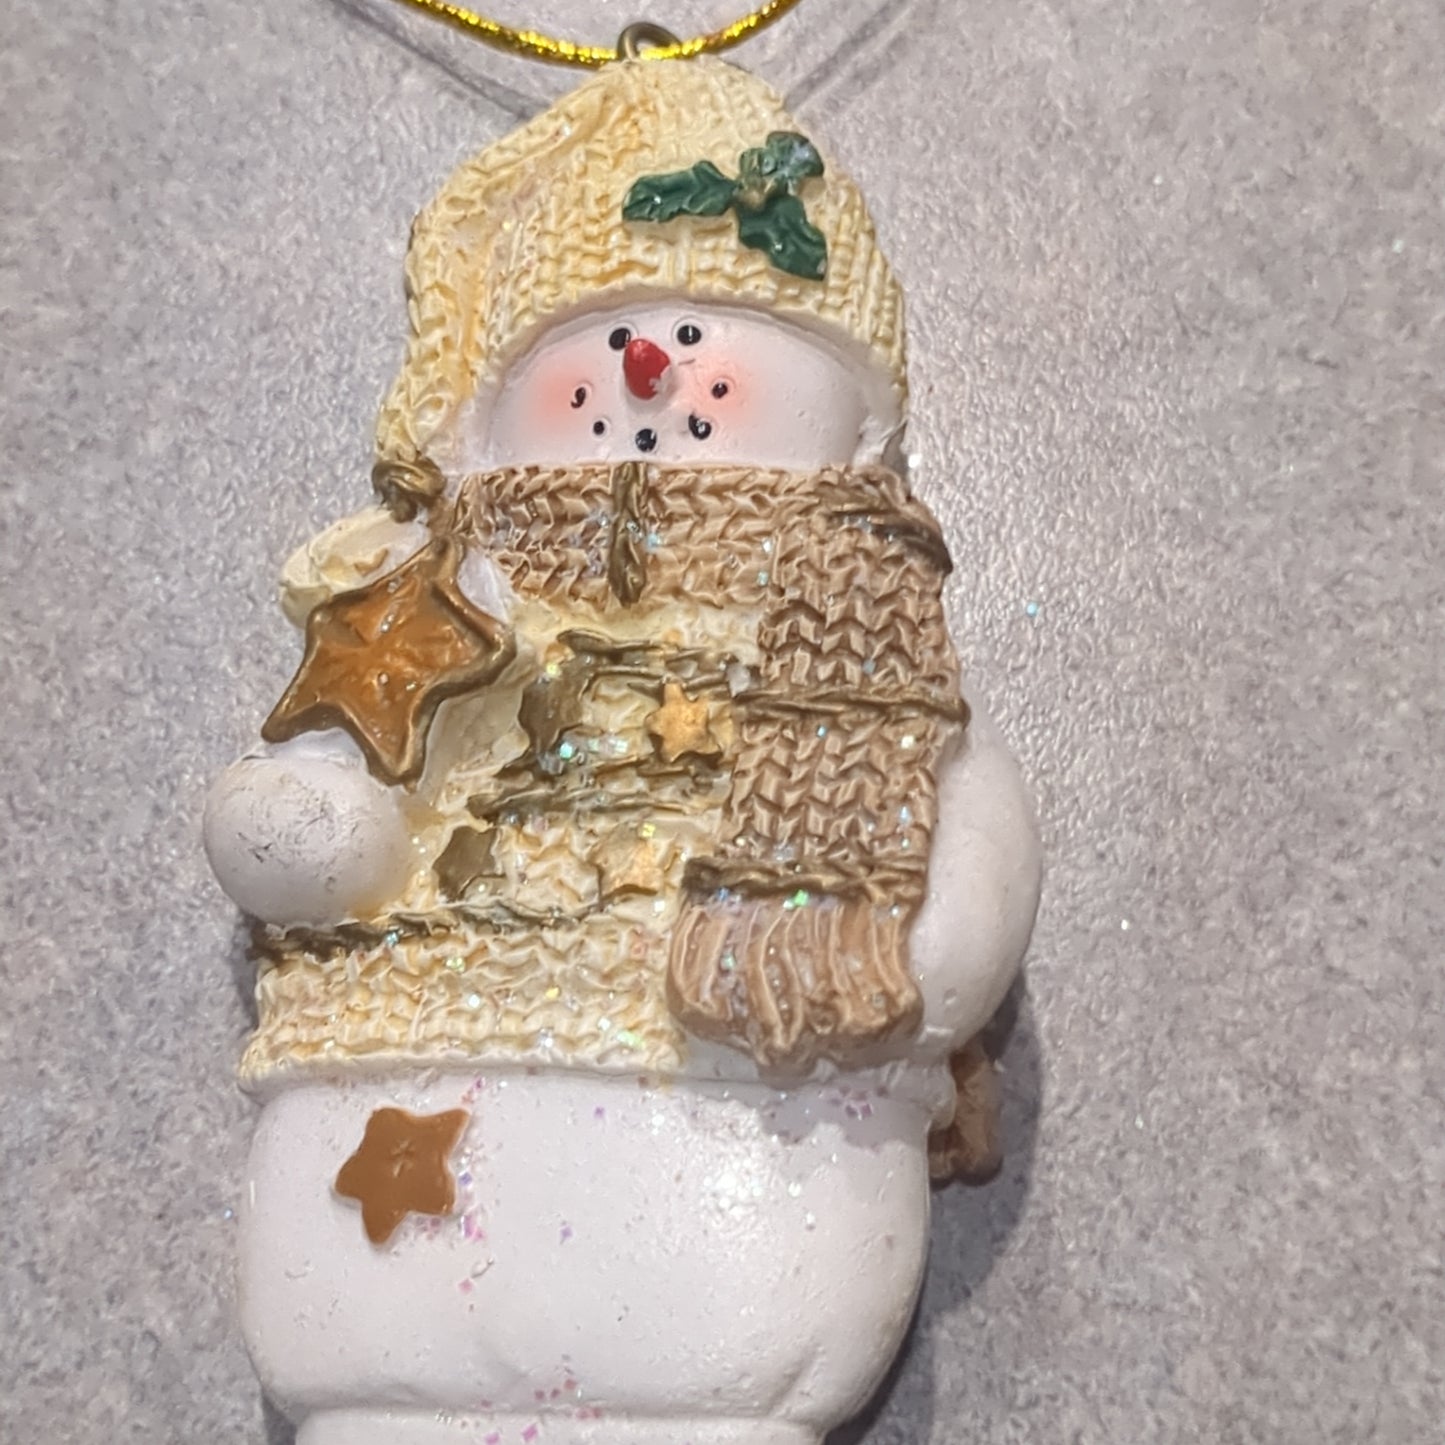 Polycrylic snowman ornament with star yellow